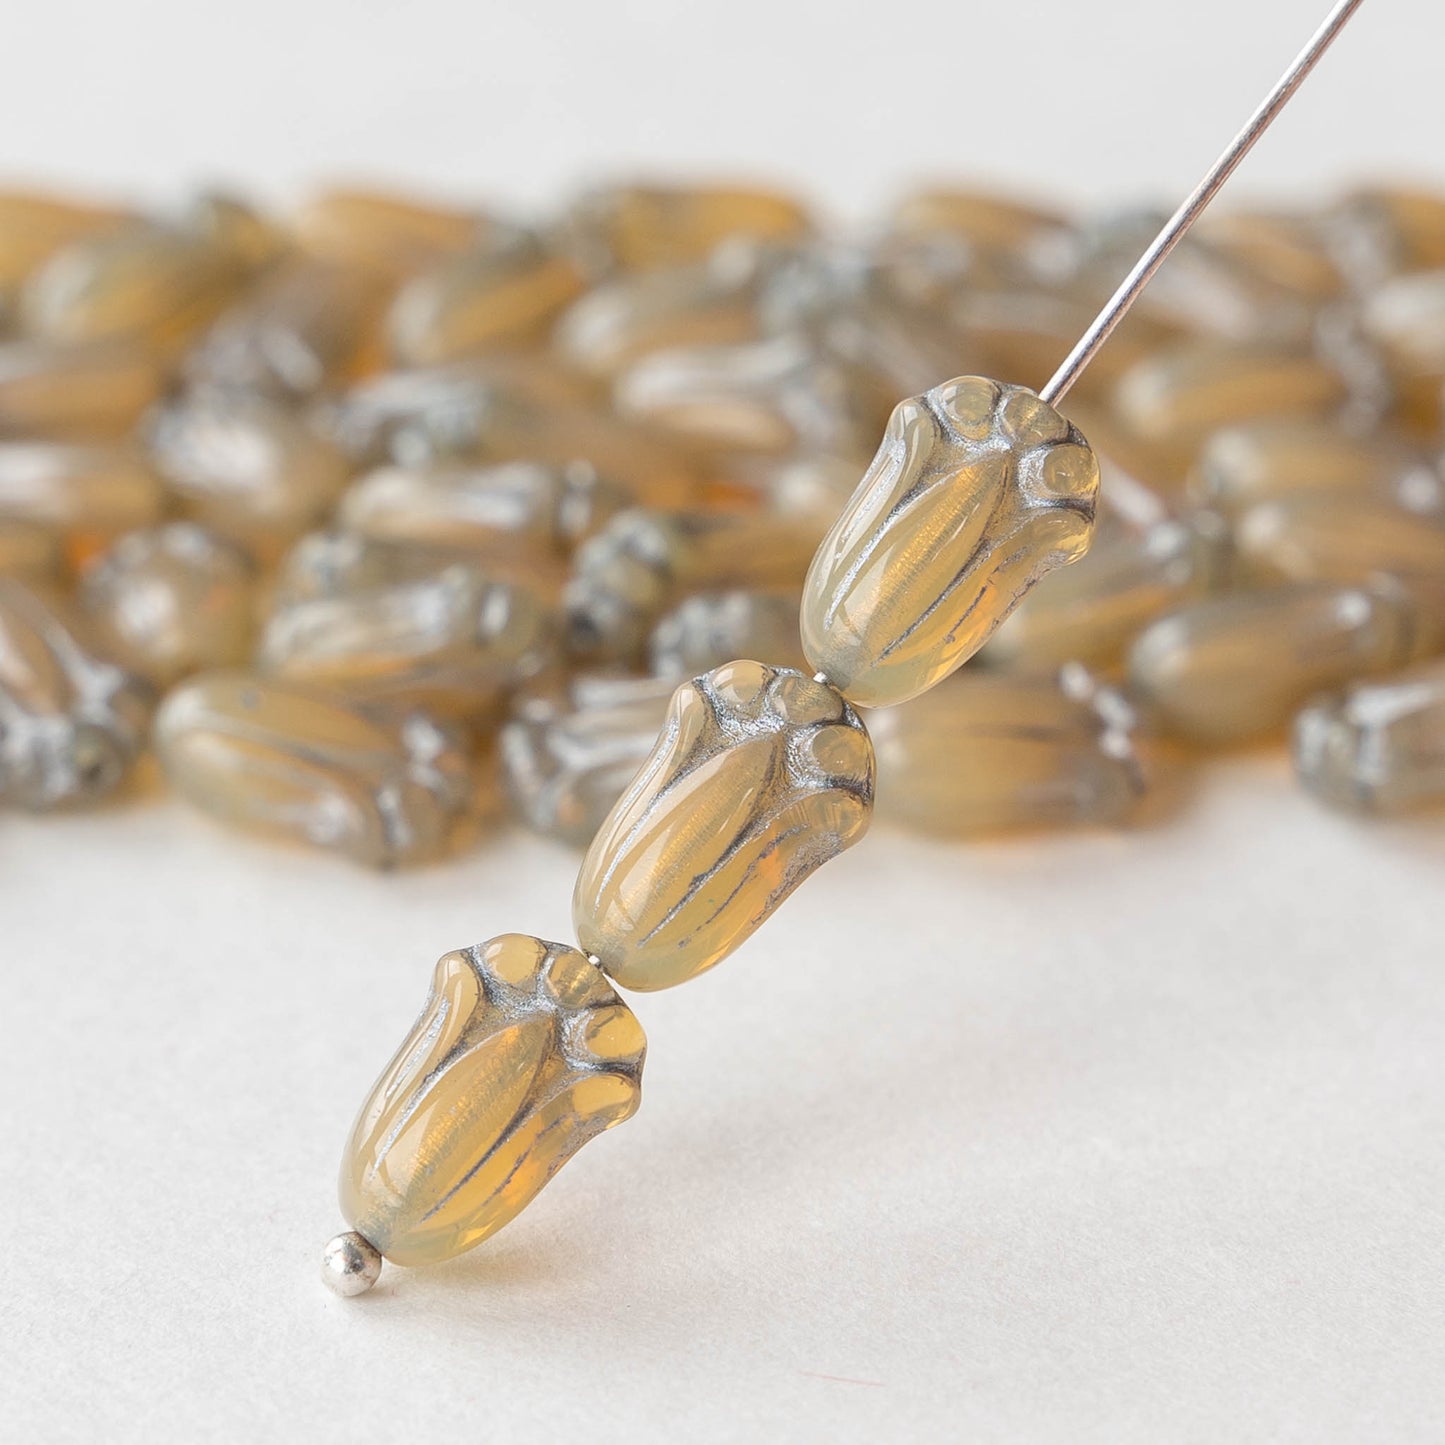 12mm Glass Tulip Beads - Beige with Silver Wash - 10 Beads